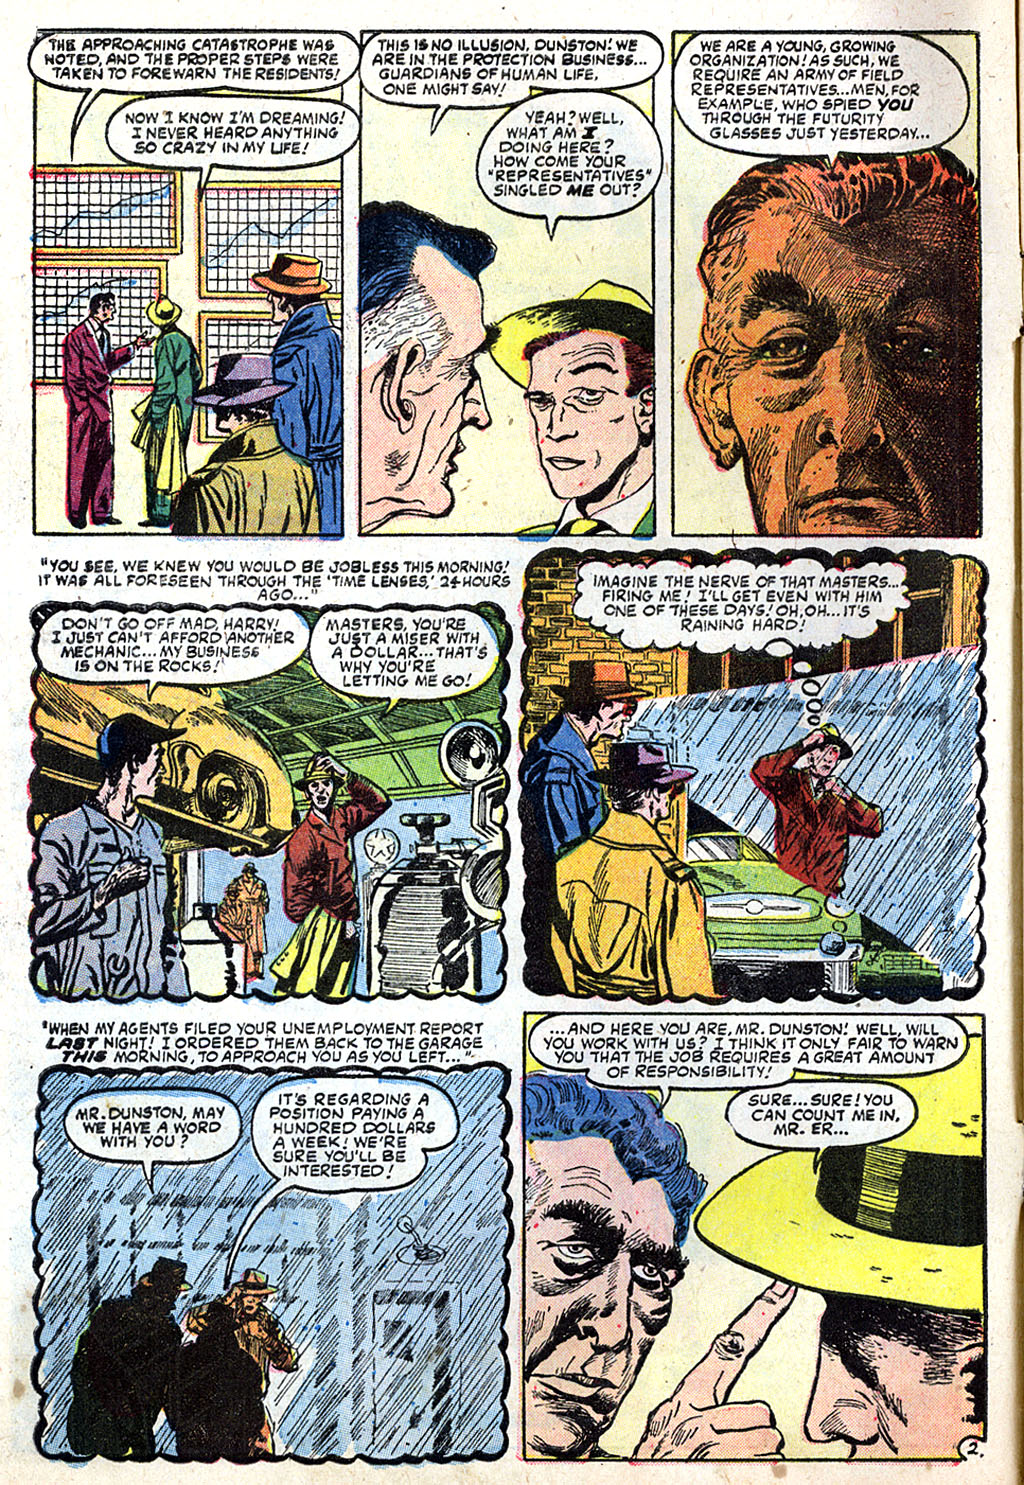 Marvel Tales (1949) 138 Page 3